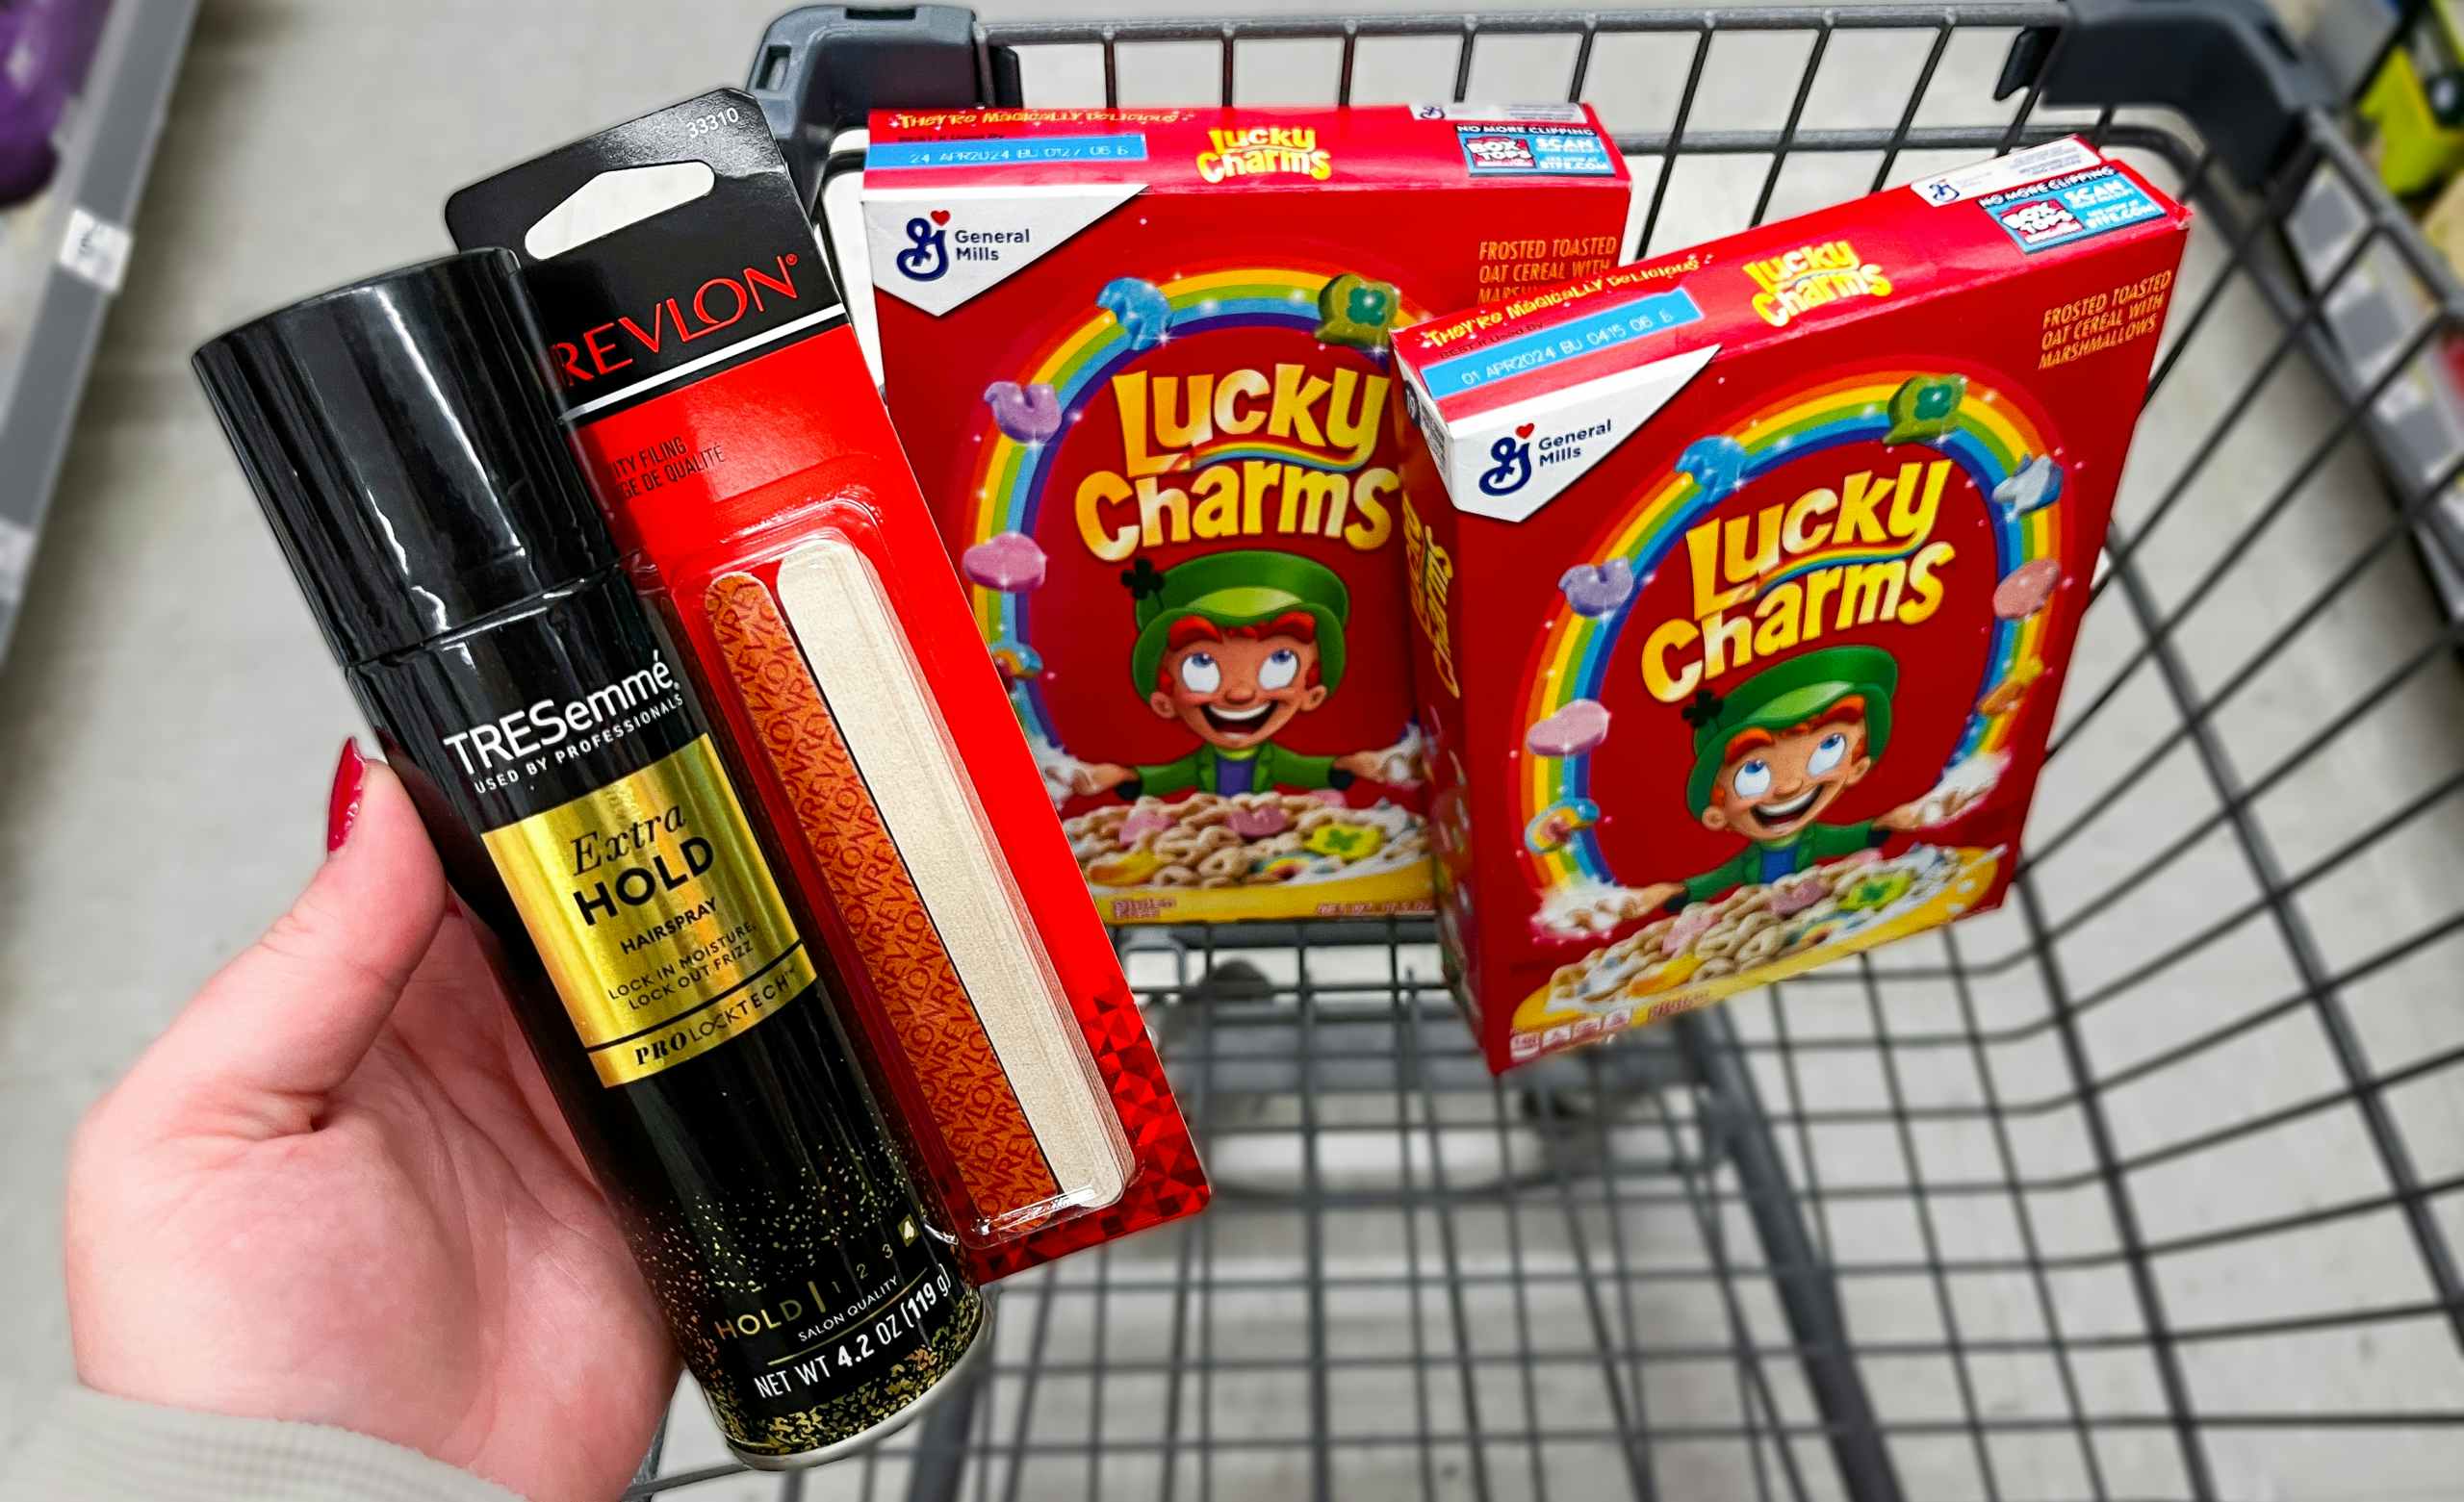 lucky charms cereal, tresemme hair spray, and revlon emery boards in cart